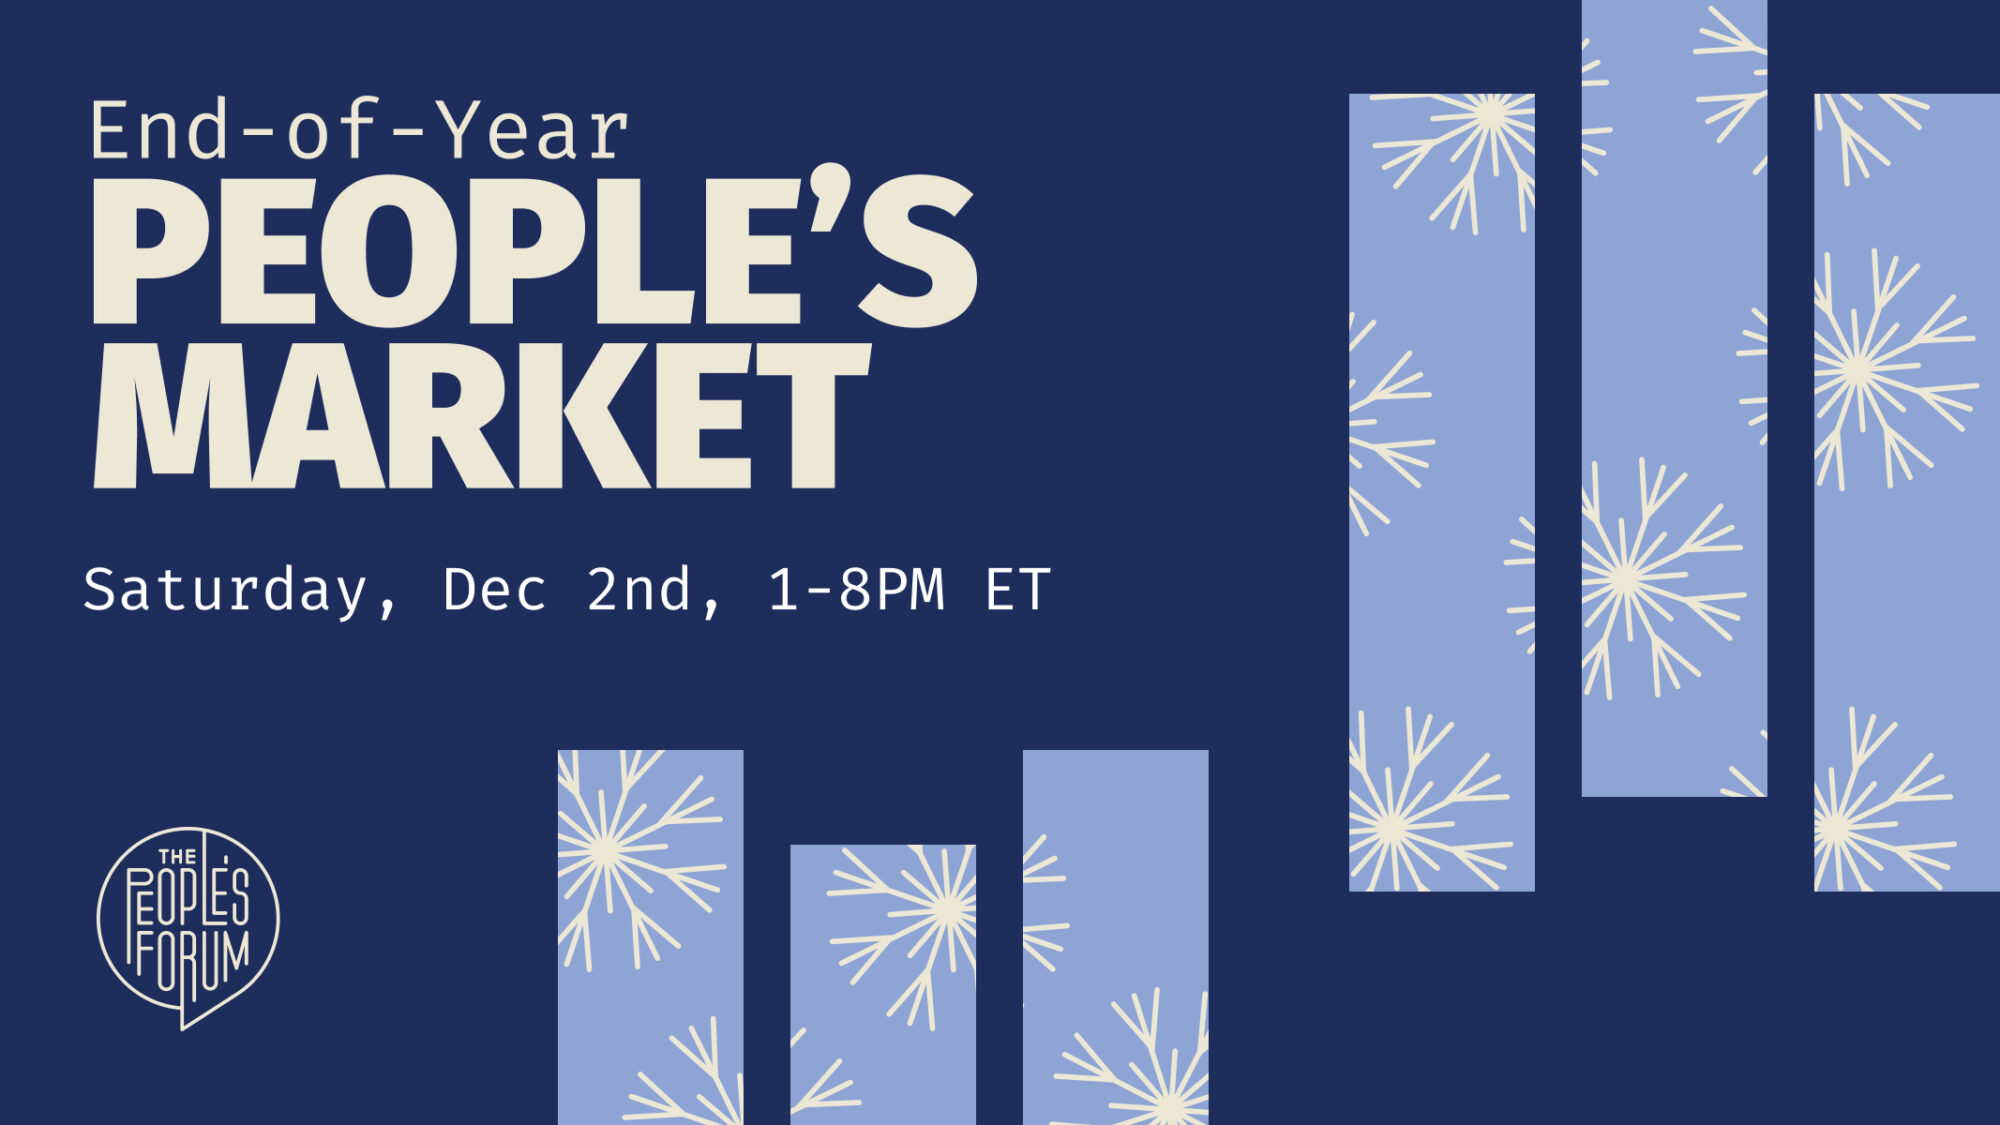 End-of-Year People's Market Saturday, Dec 2nd 1-8PM ET